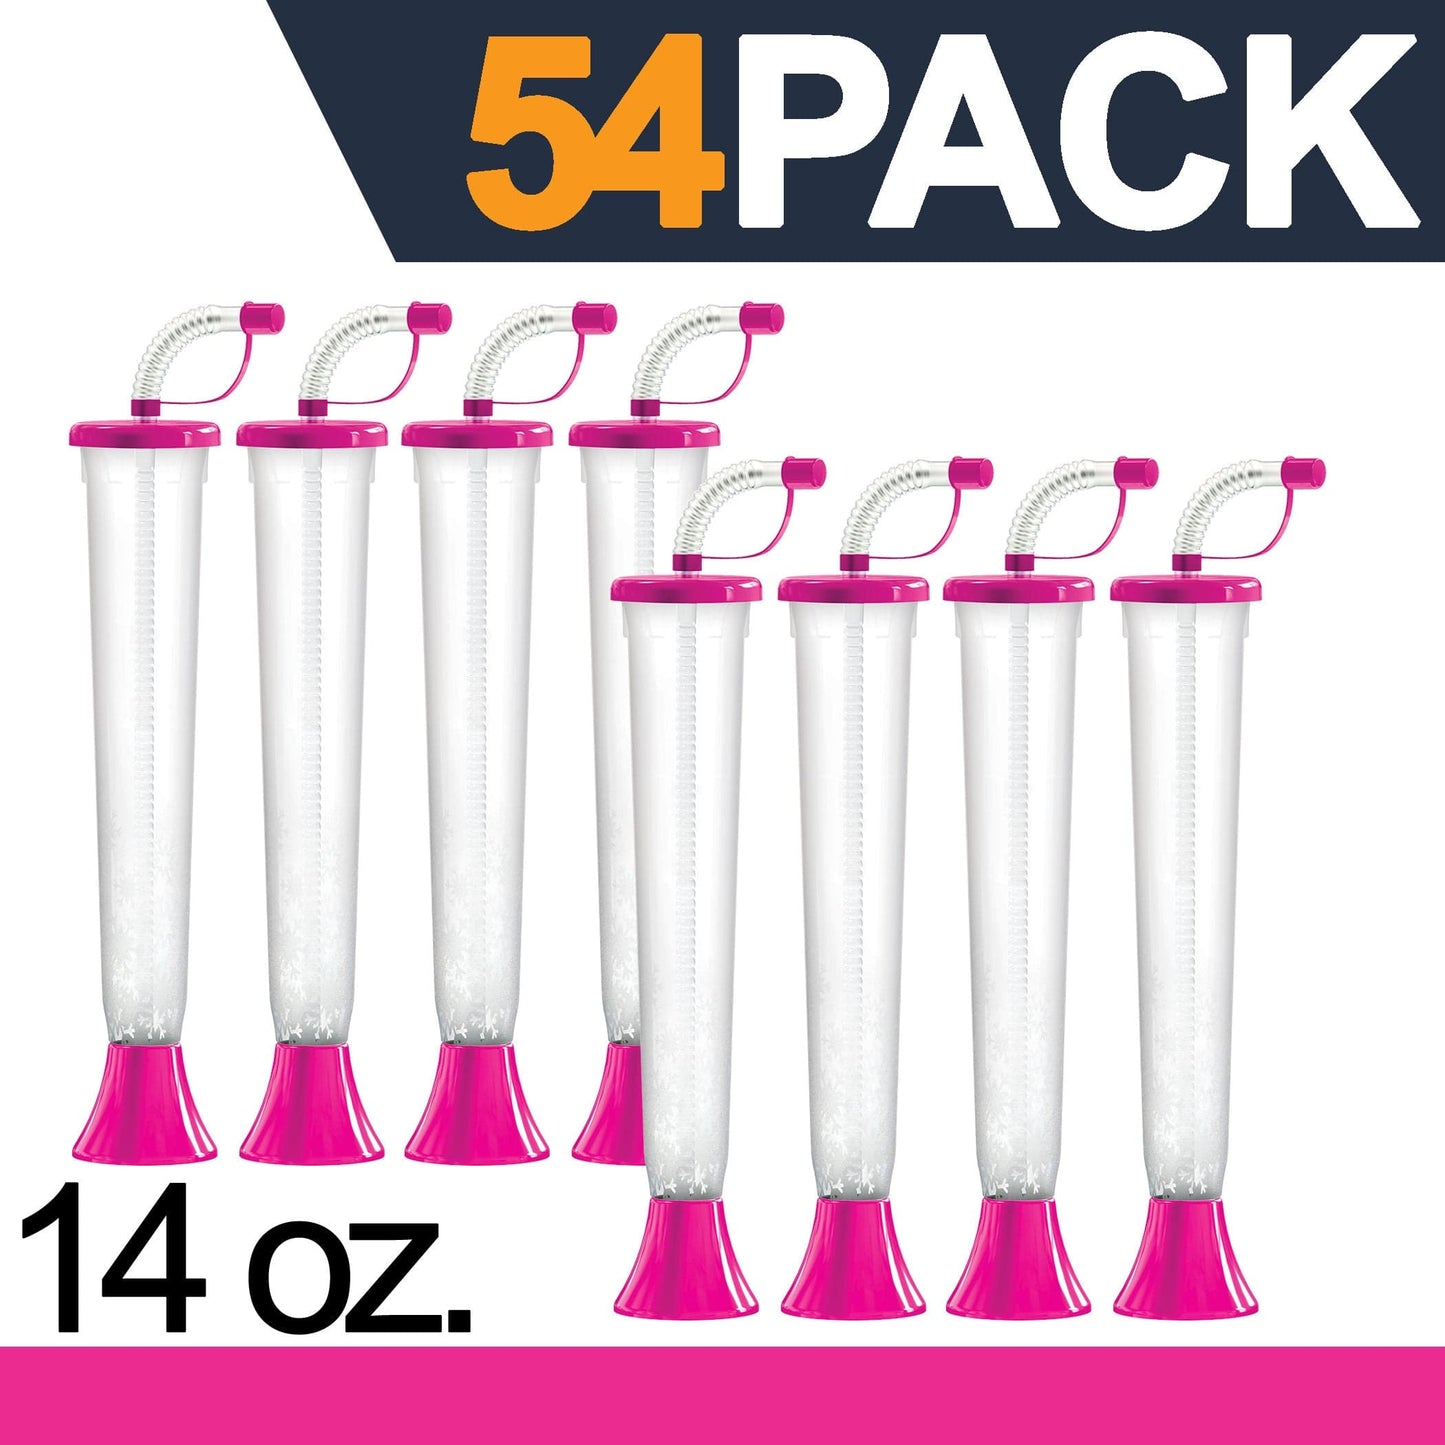 Sweet World USA Yard Cups 54 Cups Yard Cups with PINK Lids and Straws - for Margaritas, Cold Drinks, Frozen Drinks, Kids Party - 14 oz. (400 ml) cups with lids and straws